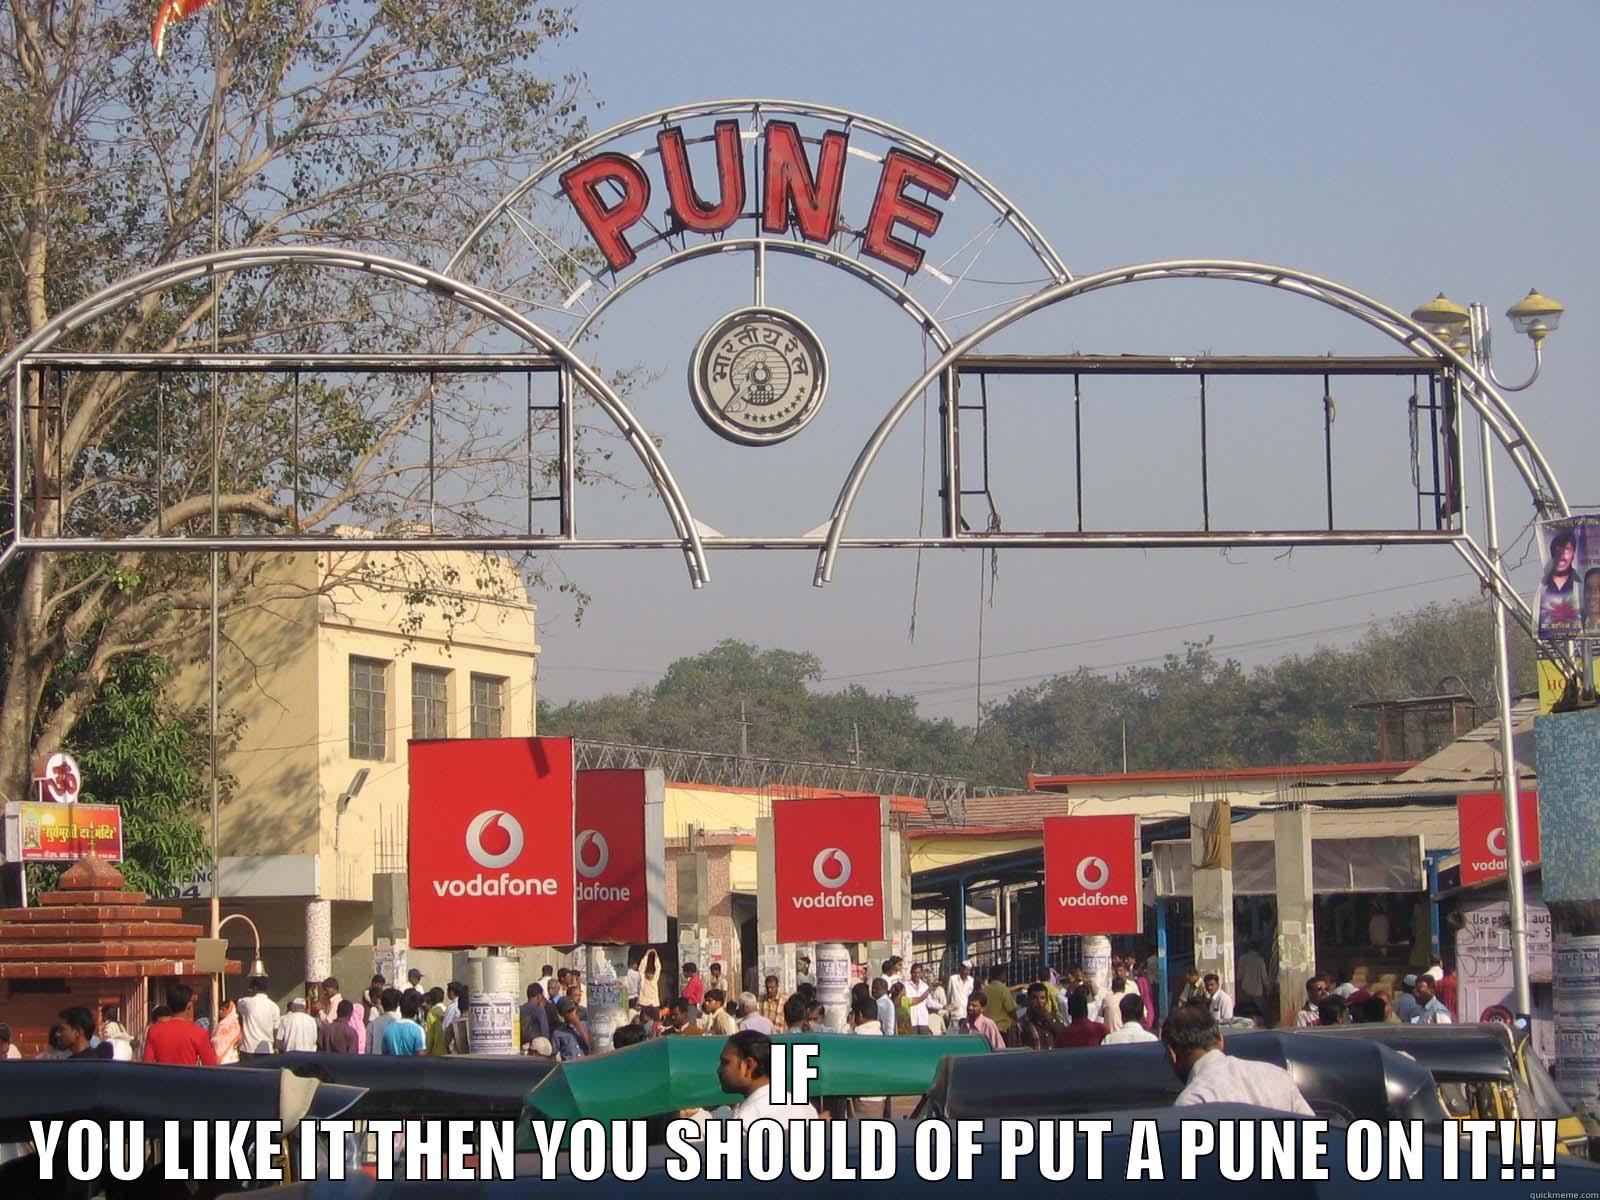  IF YOU LIKE IT THEN YOU SHOULD OF PUT A PUNE ON IT!!! Misc